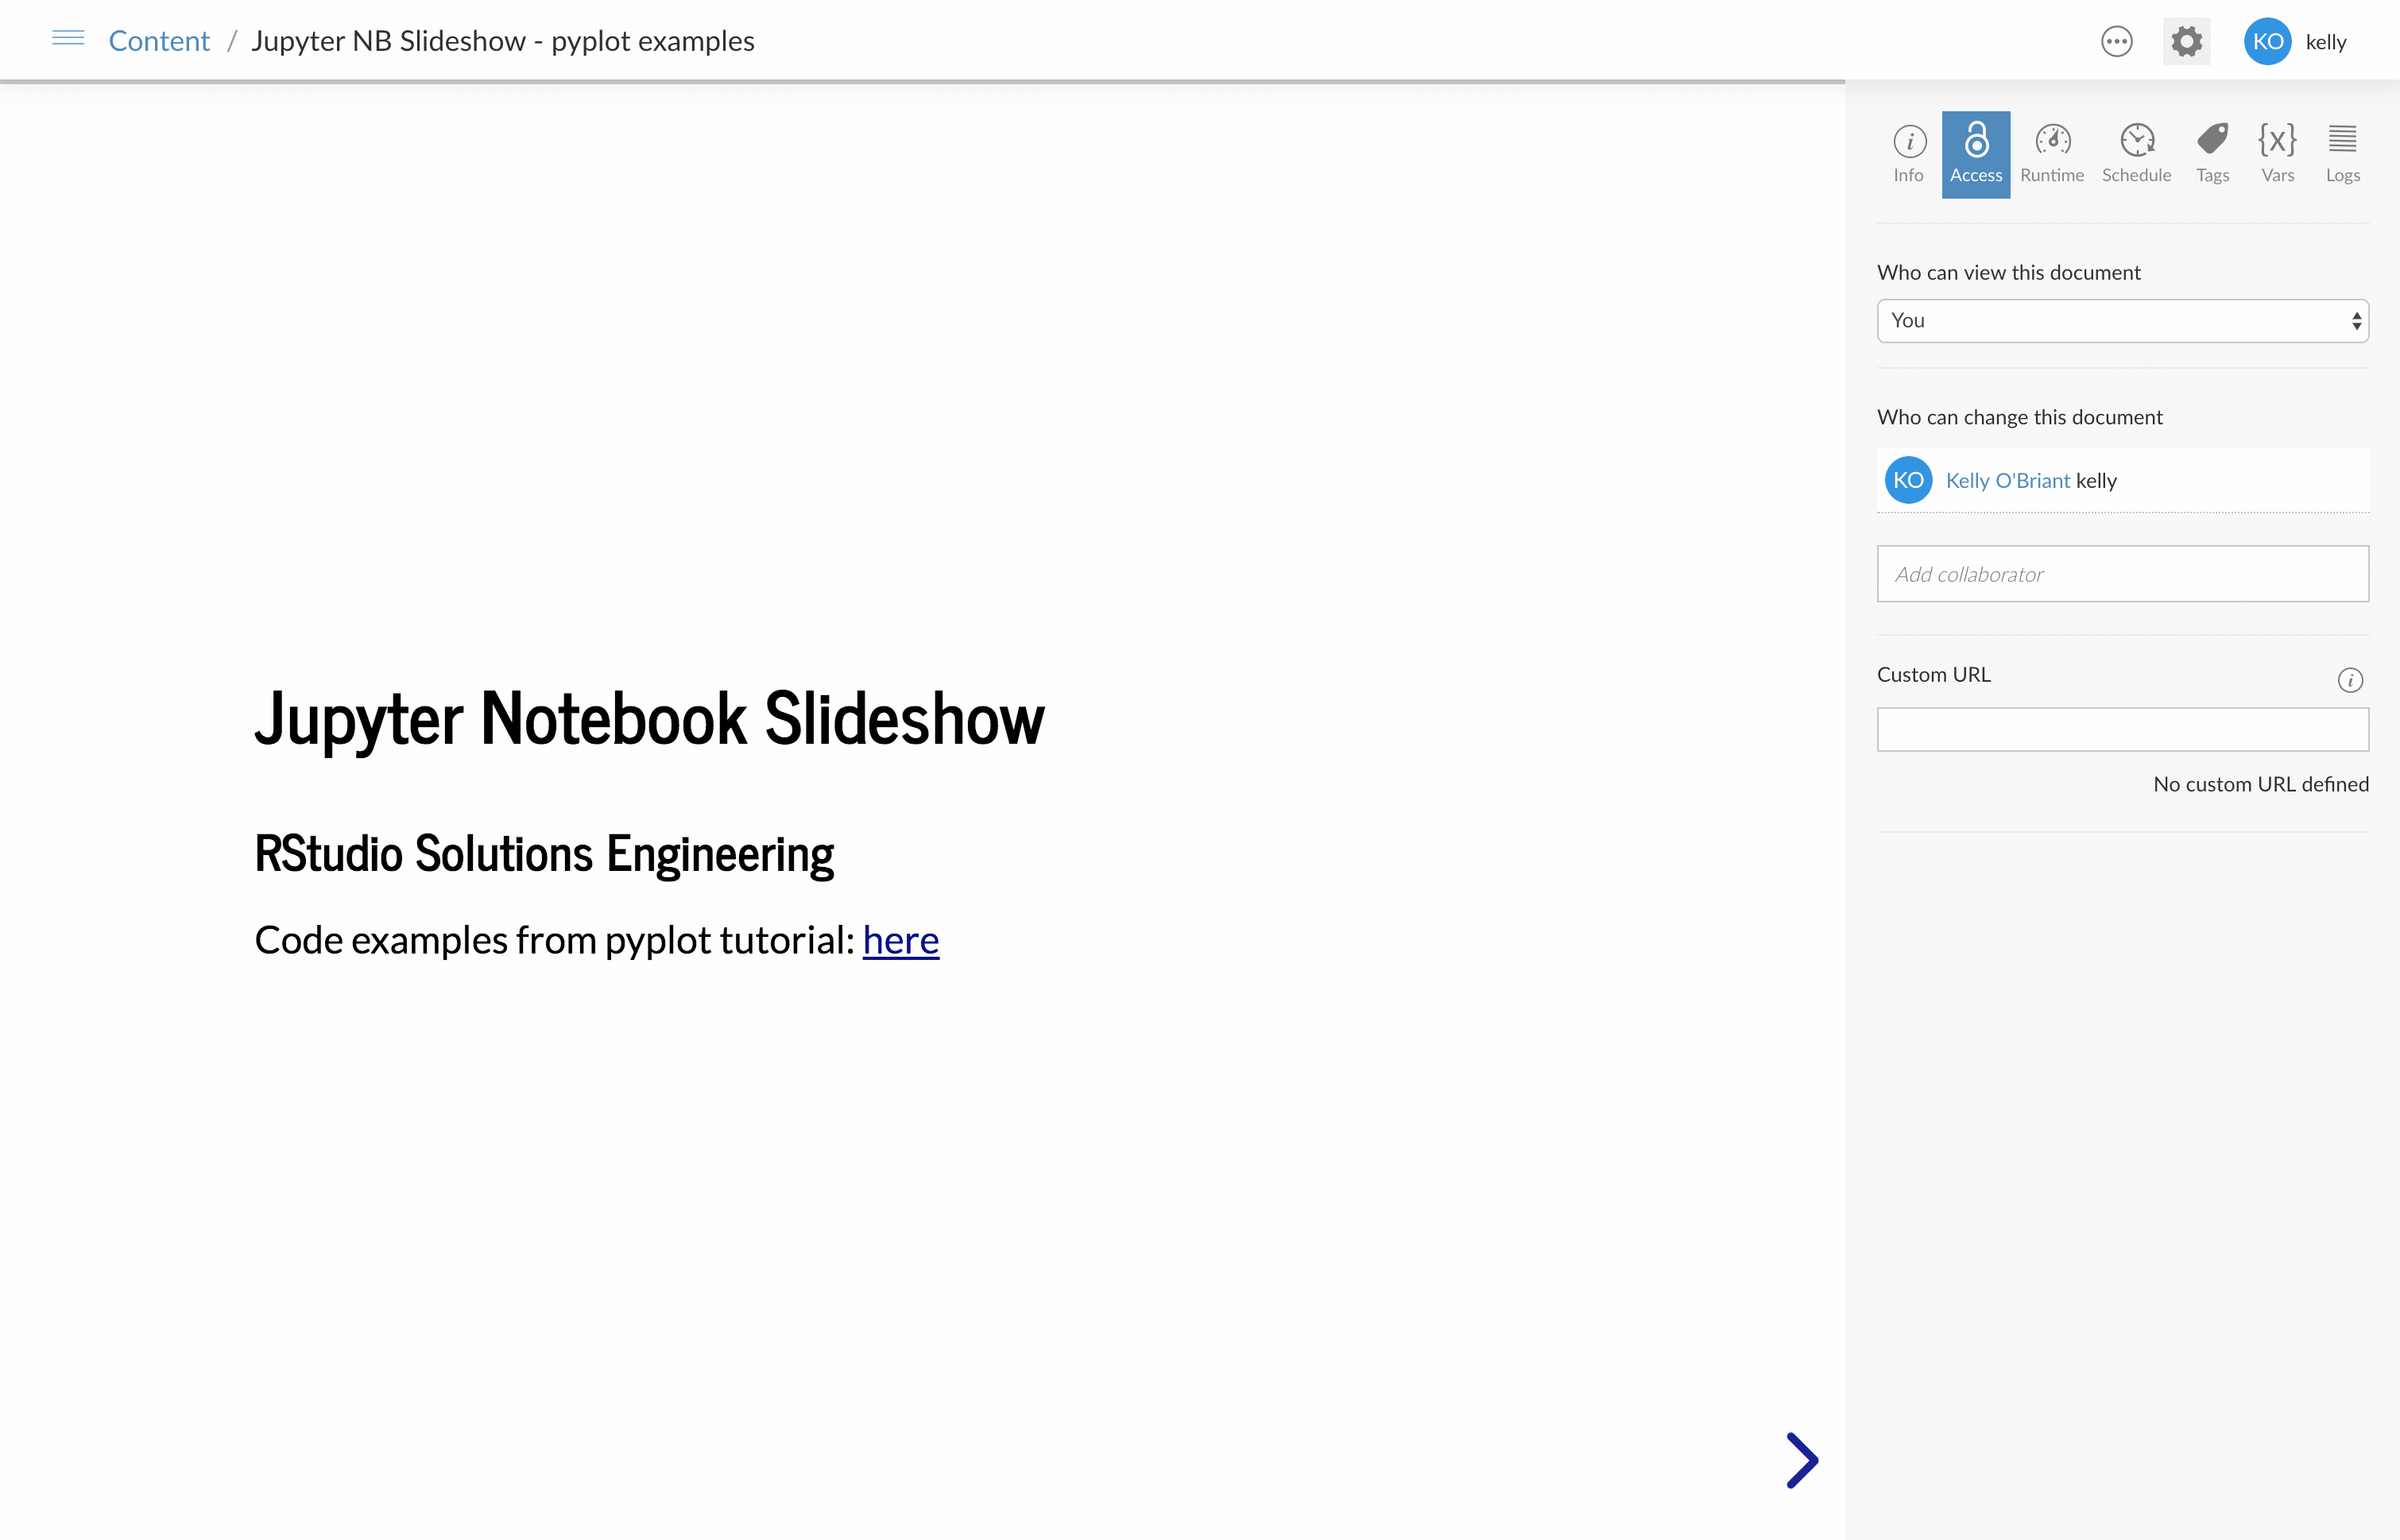 gif of the Jupyter Notebook slideshow deployed to Connect.